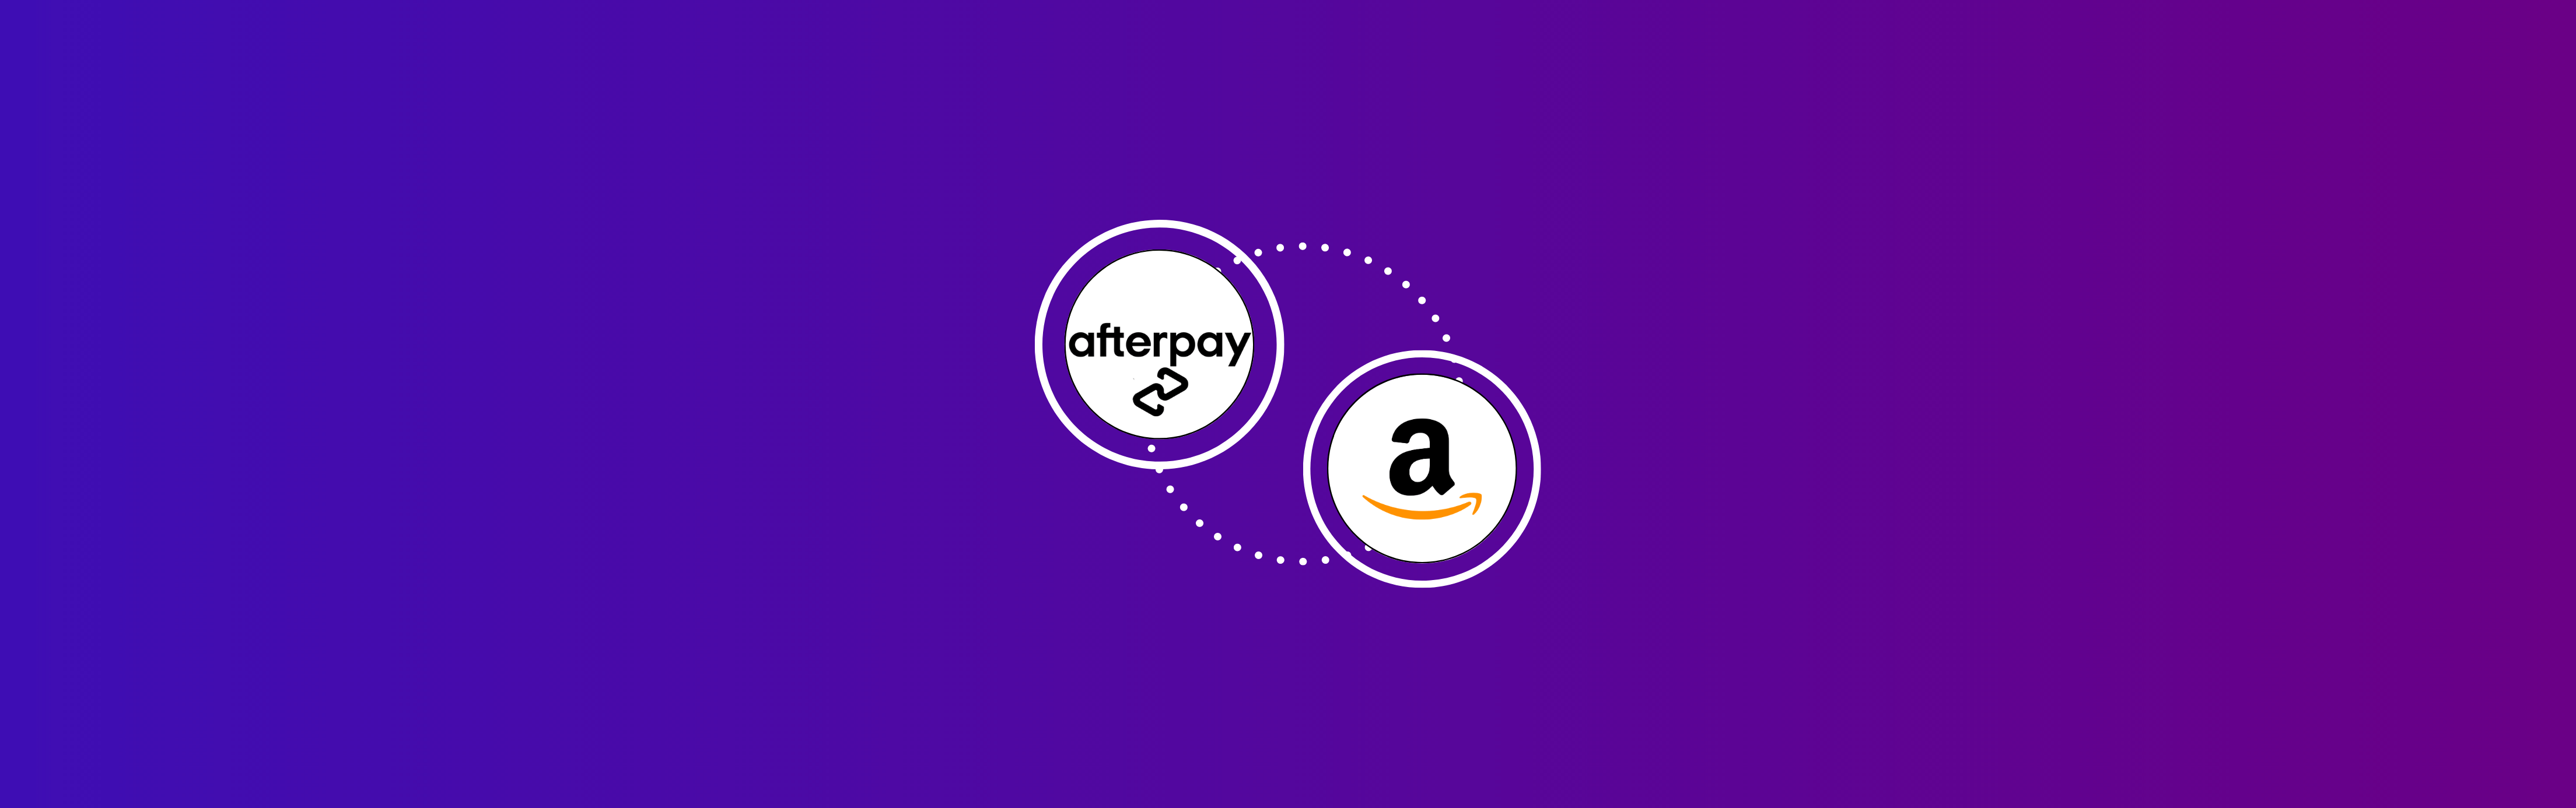 Can You Use Afterpay on Amazon? Benefits of Amazon Afterpay Combination